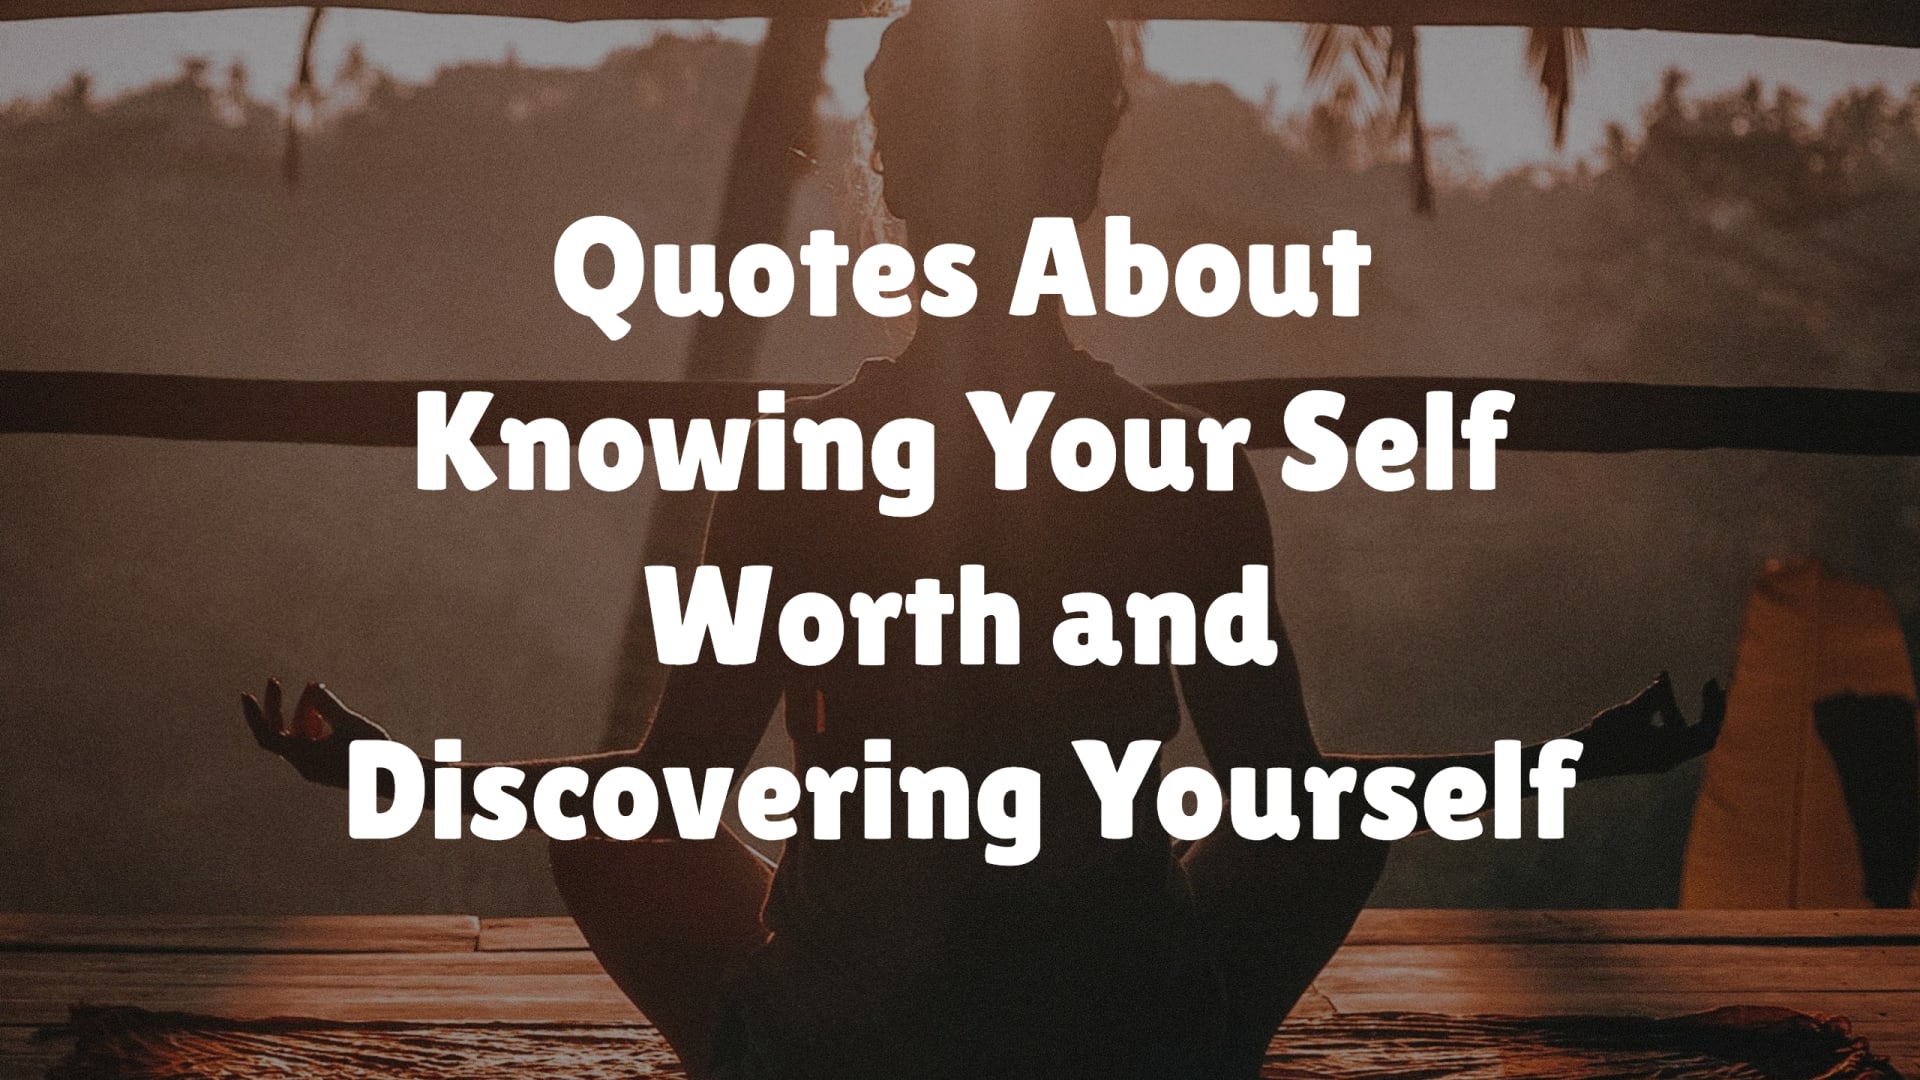 Quotes About Knowing Your Self Worth and Discovering Yourself